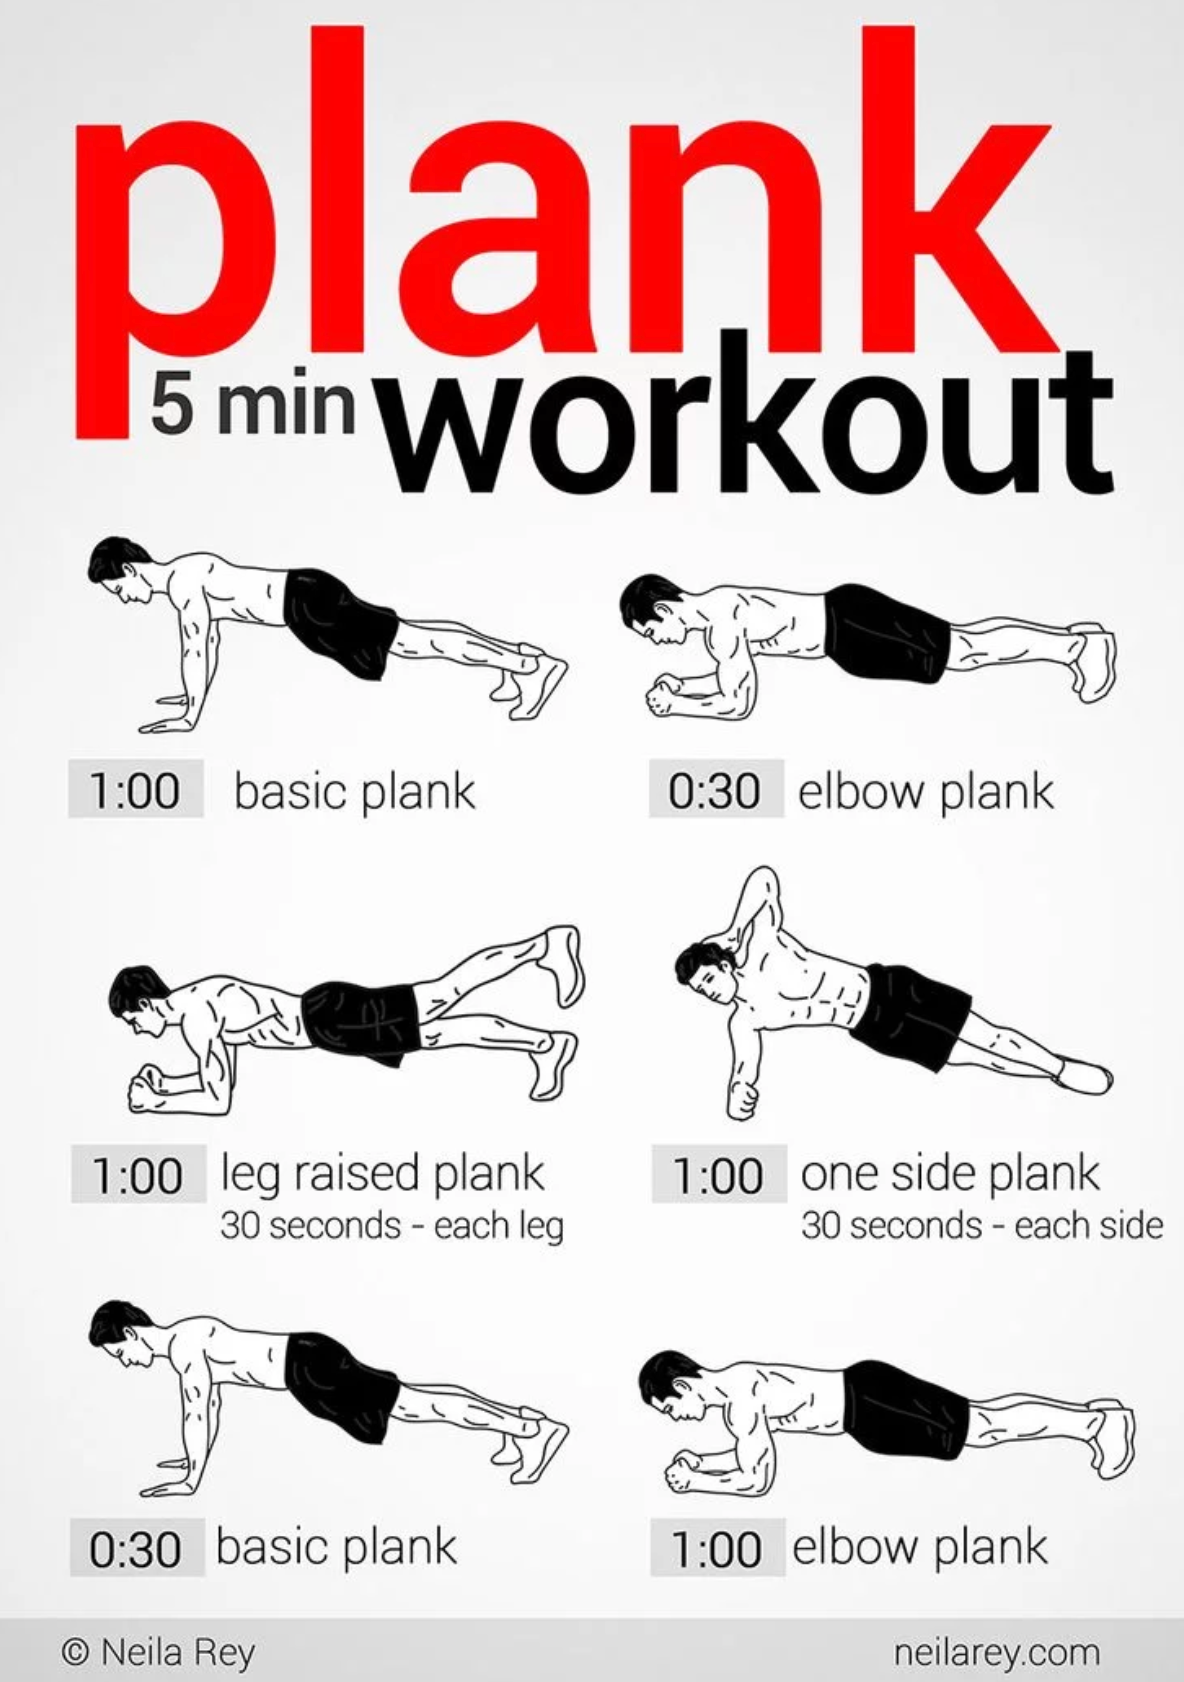 How to build up to a 12-minute plank | by Brett A. Hurt | Medium